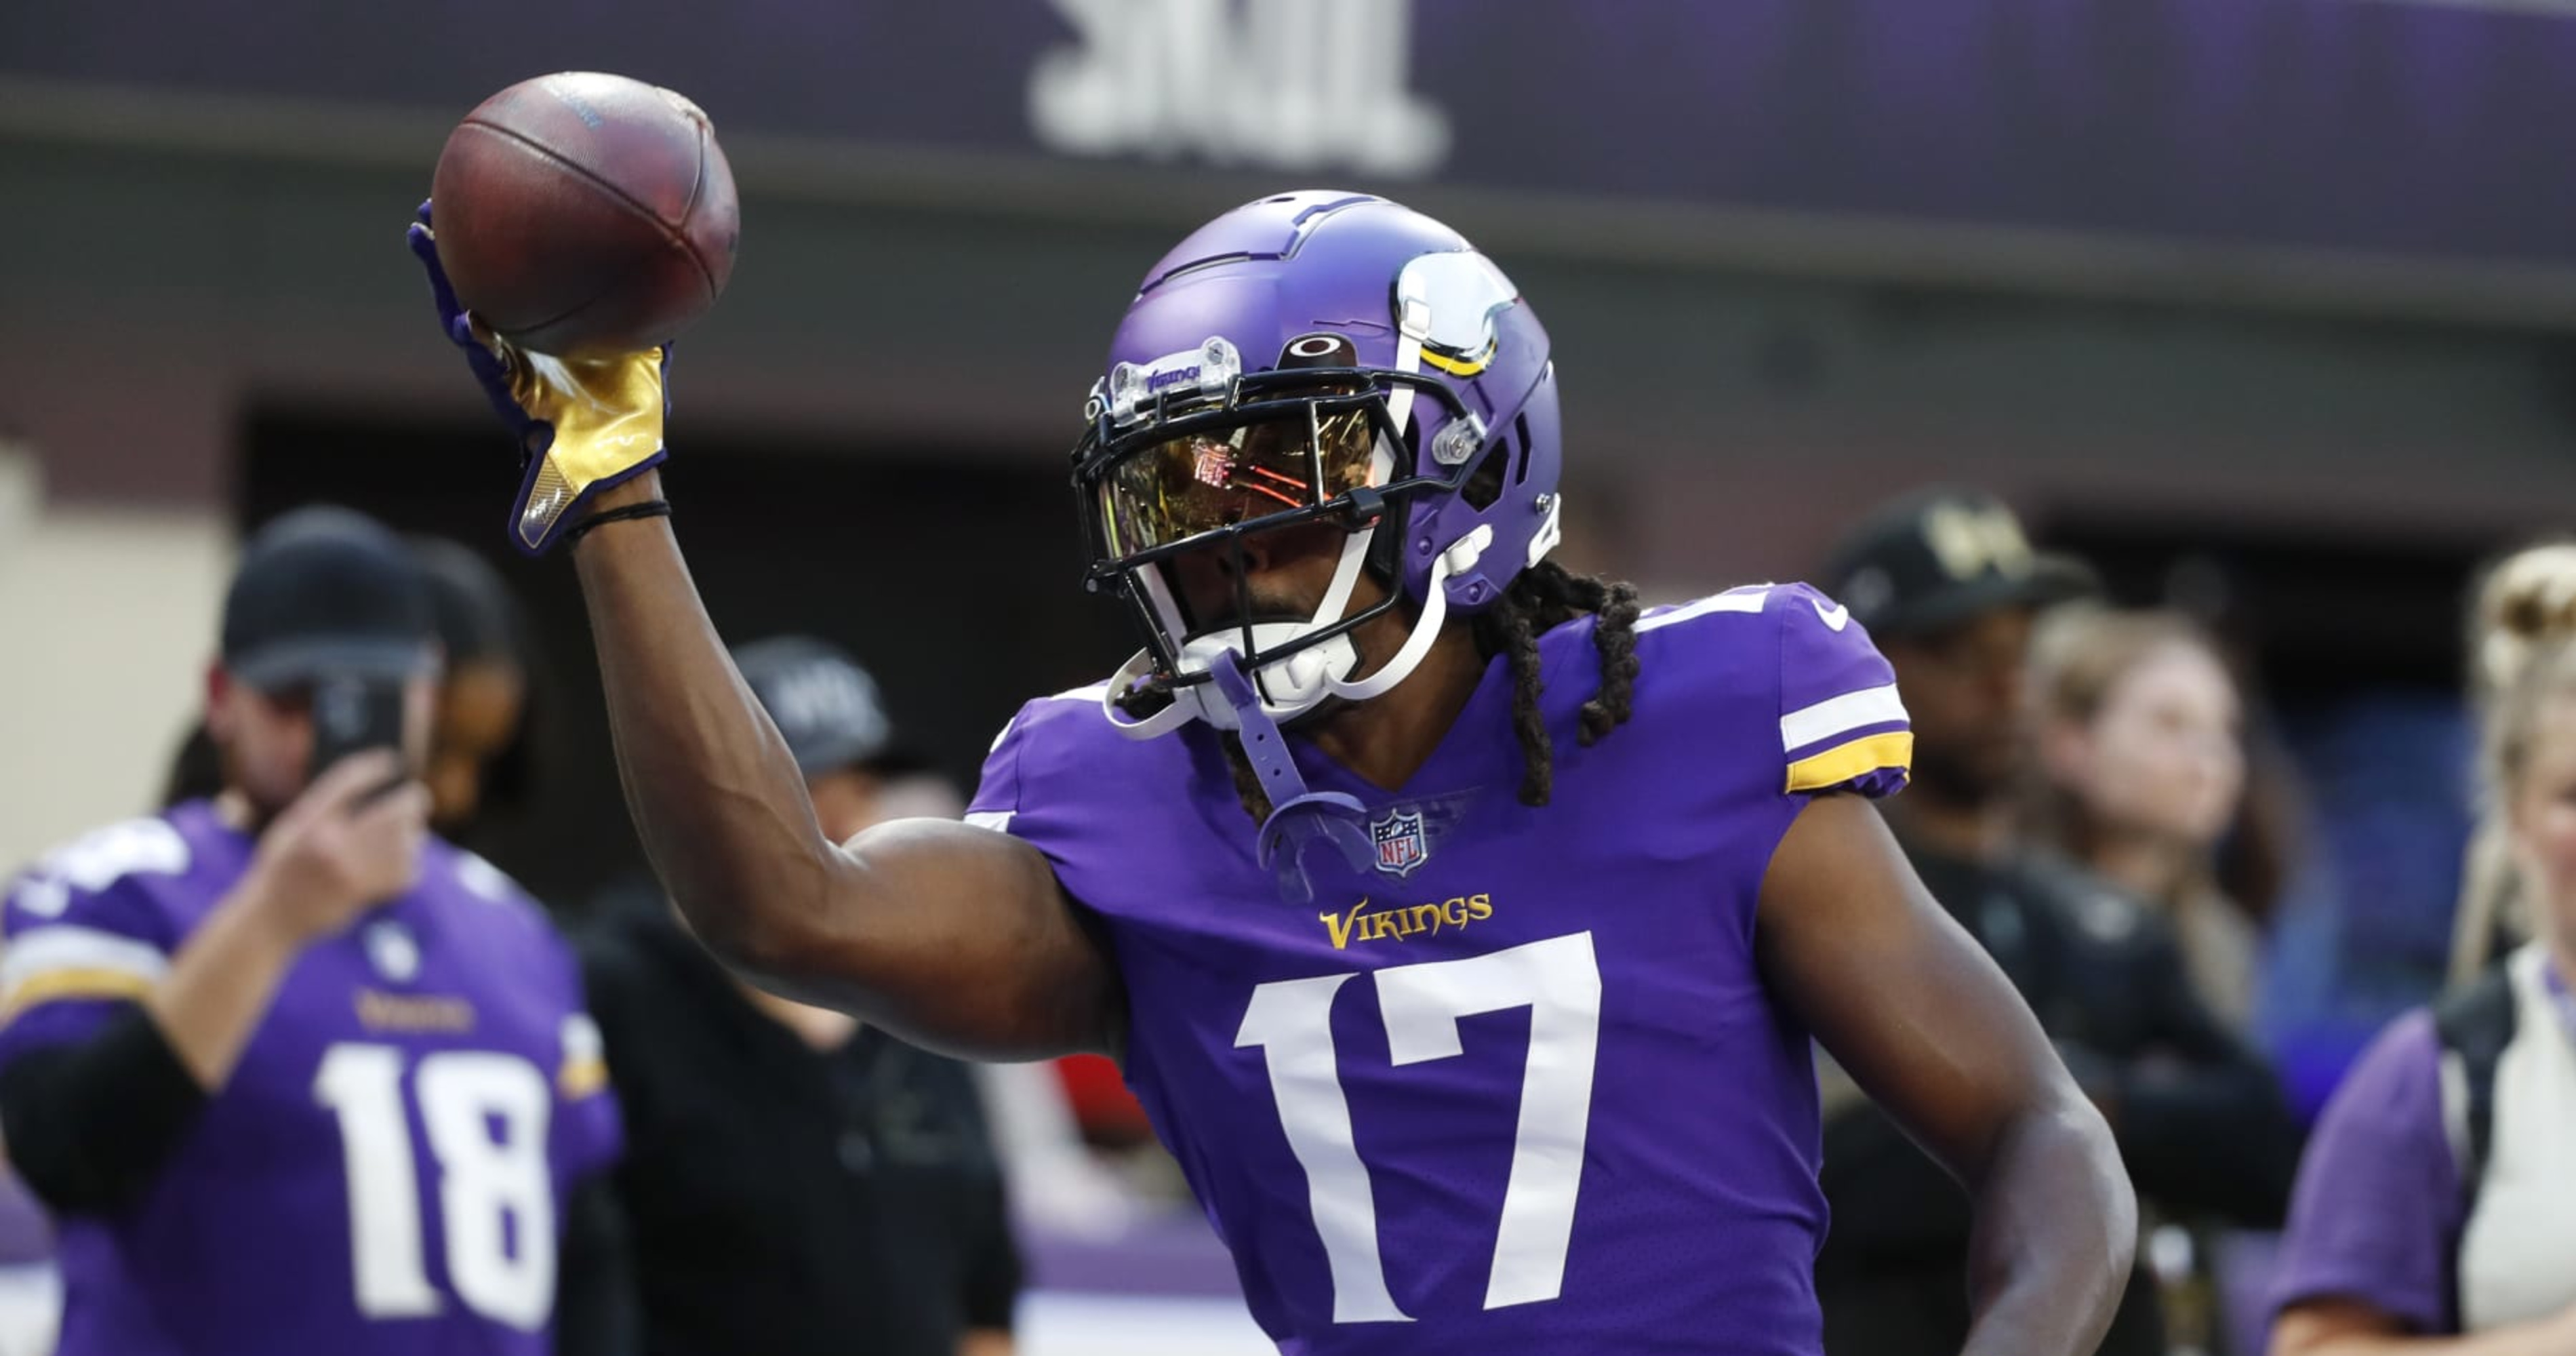 Will K.J. Osborn Have An Expanded Role In The Vikings Offense?